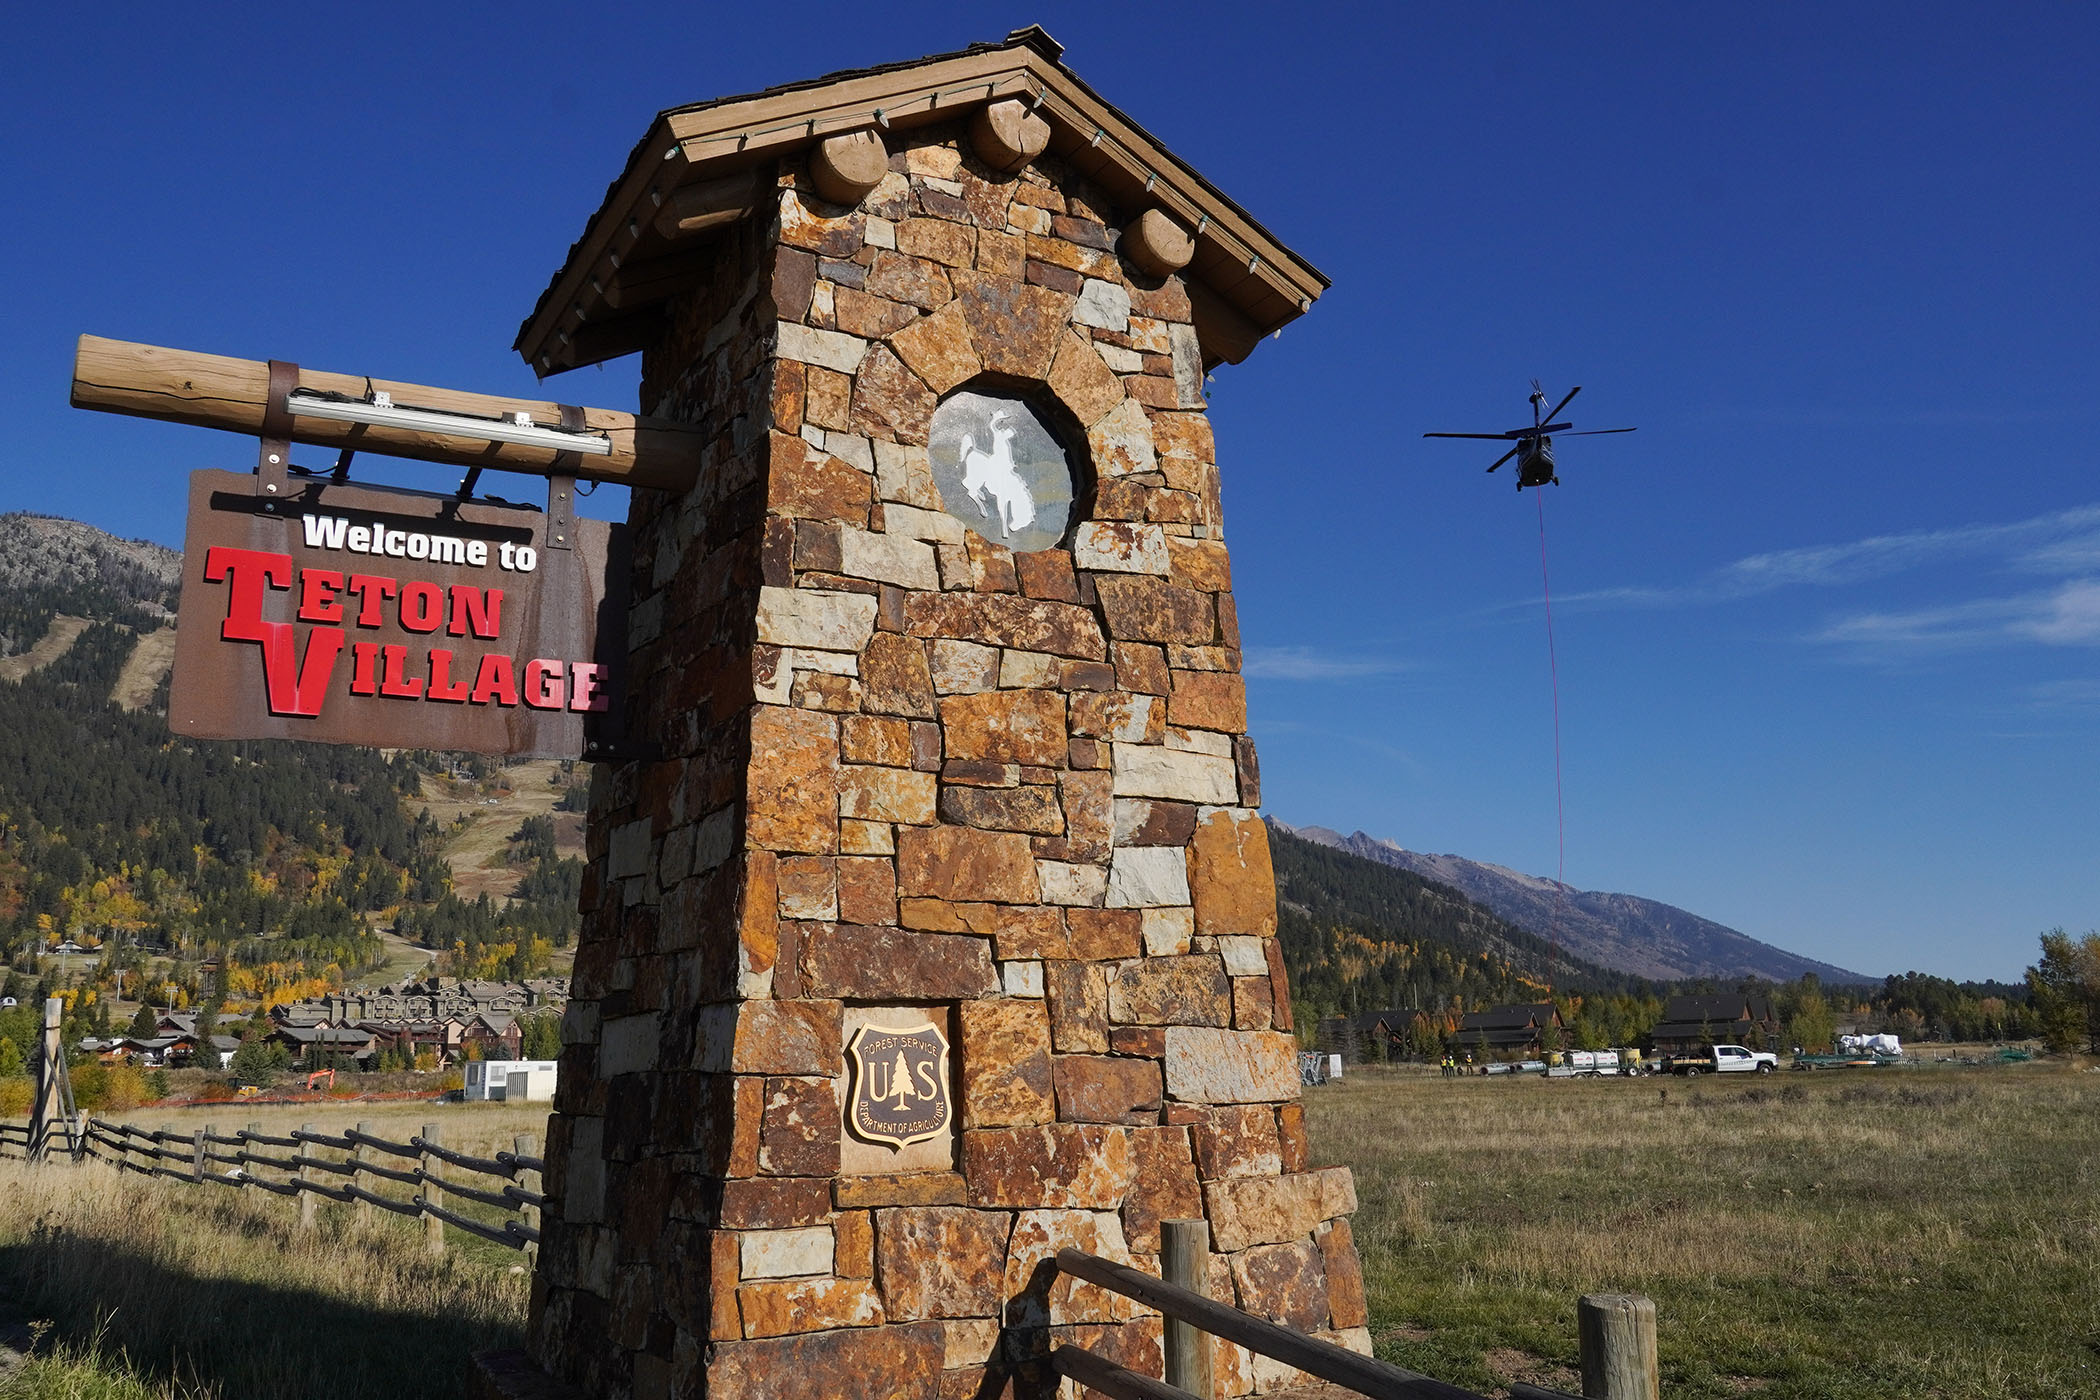 Helicopter next to the Teton Village sign